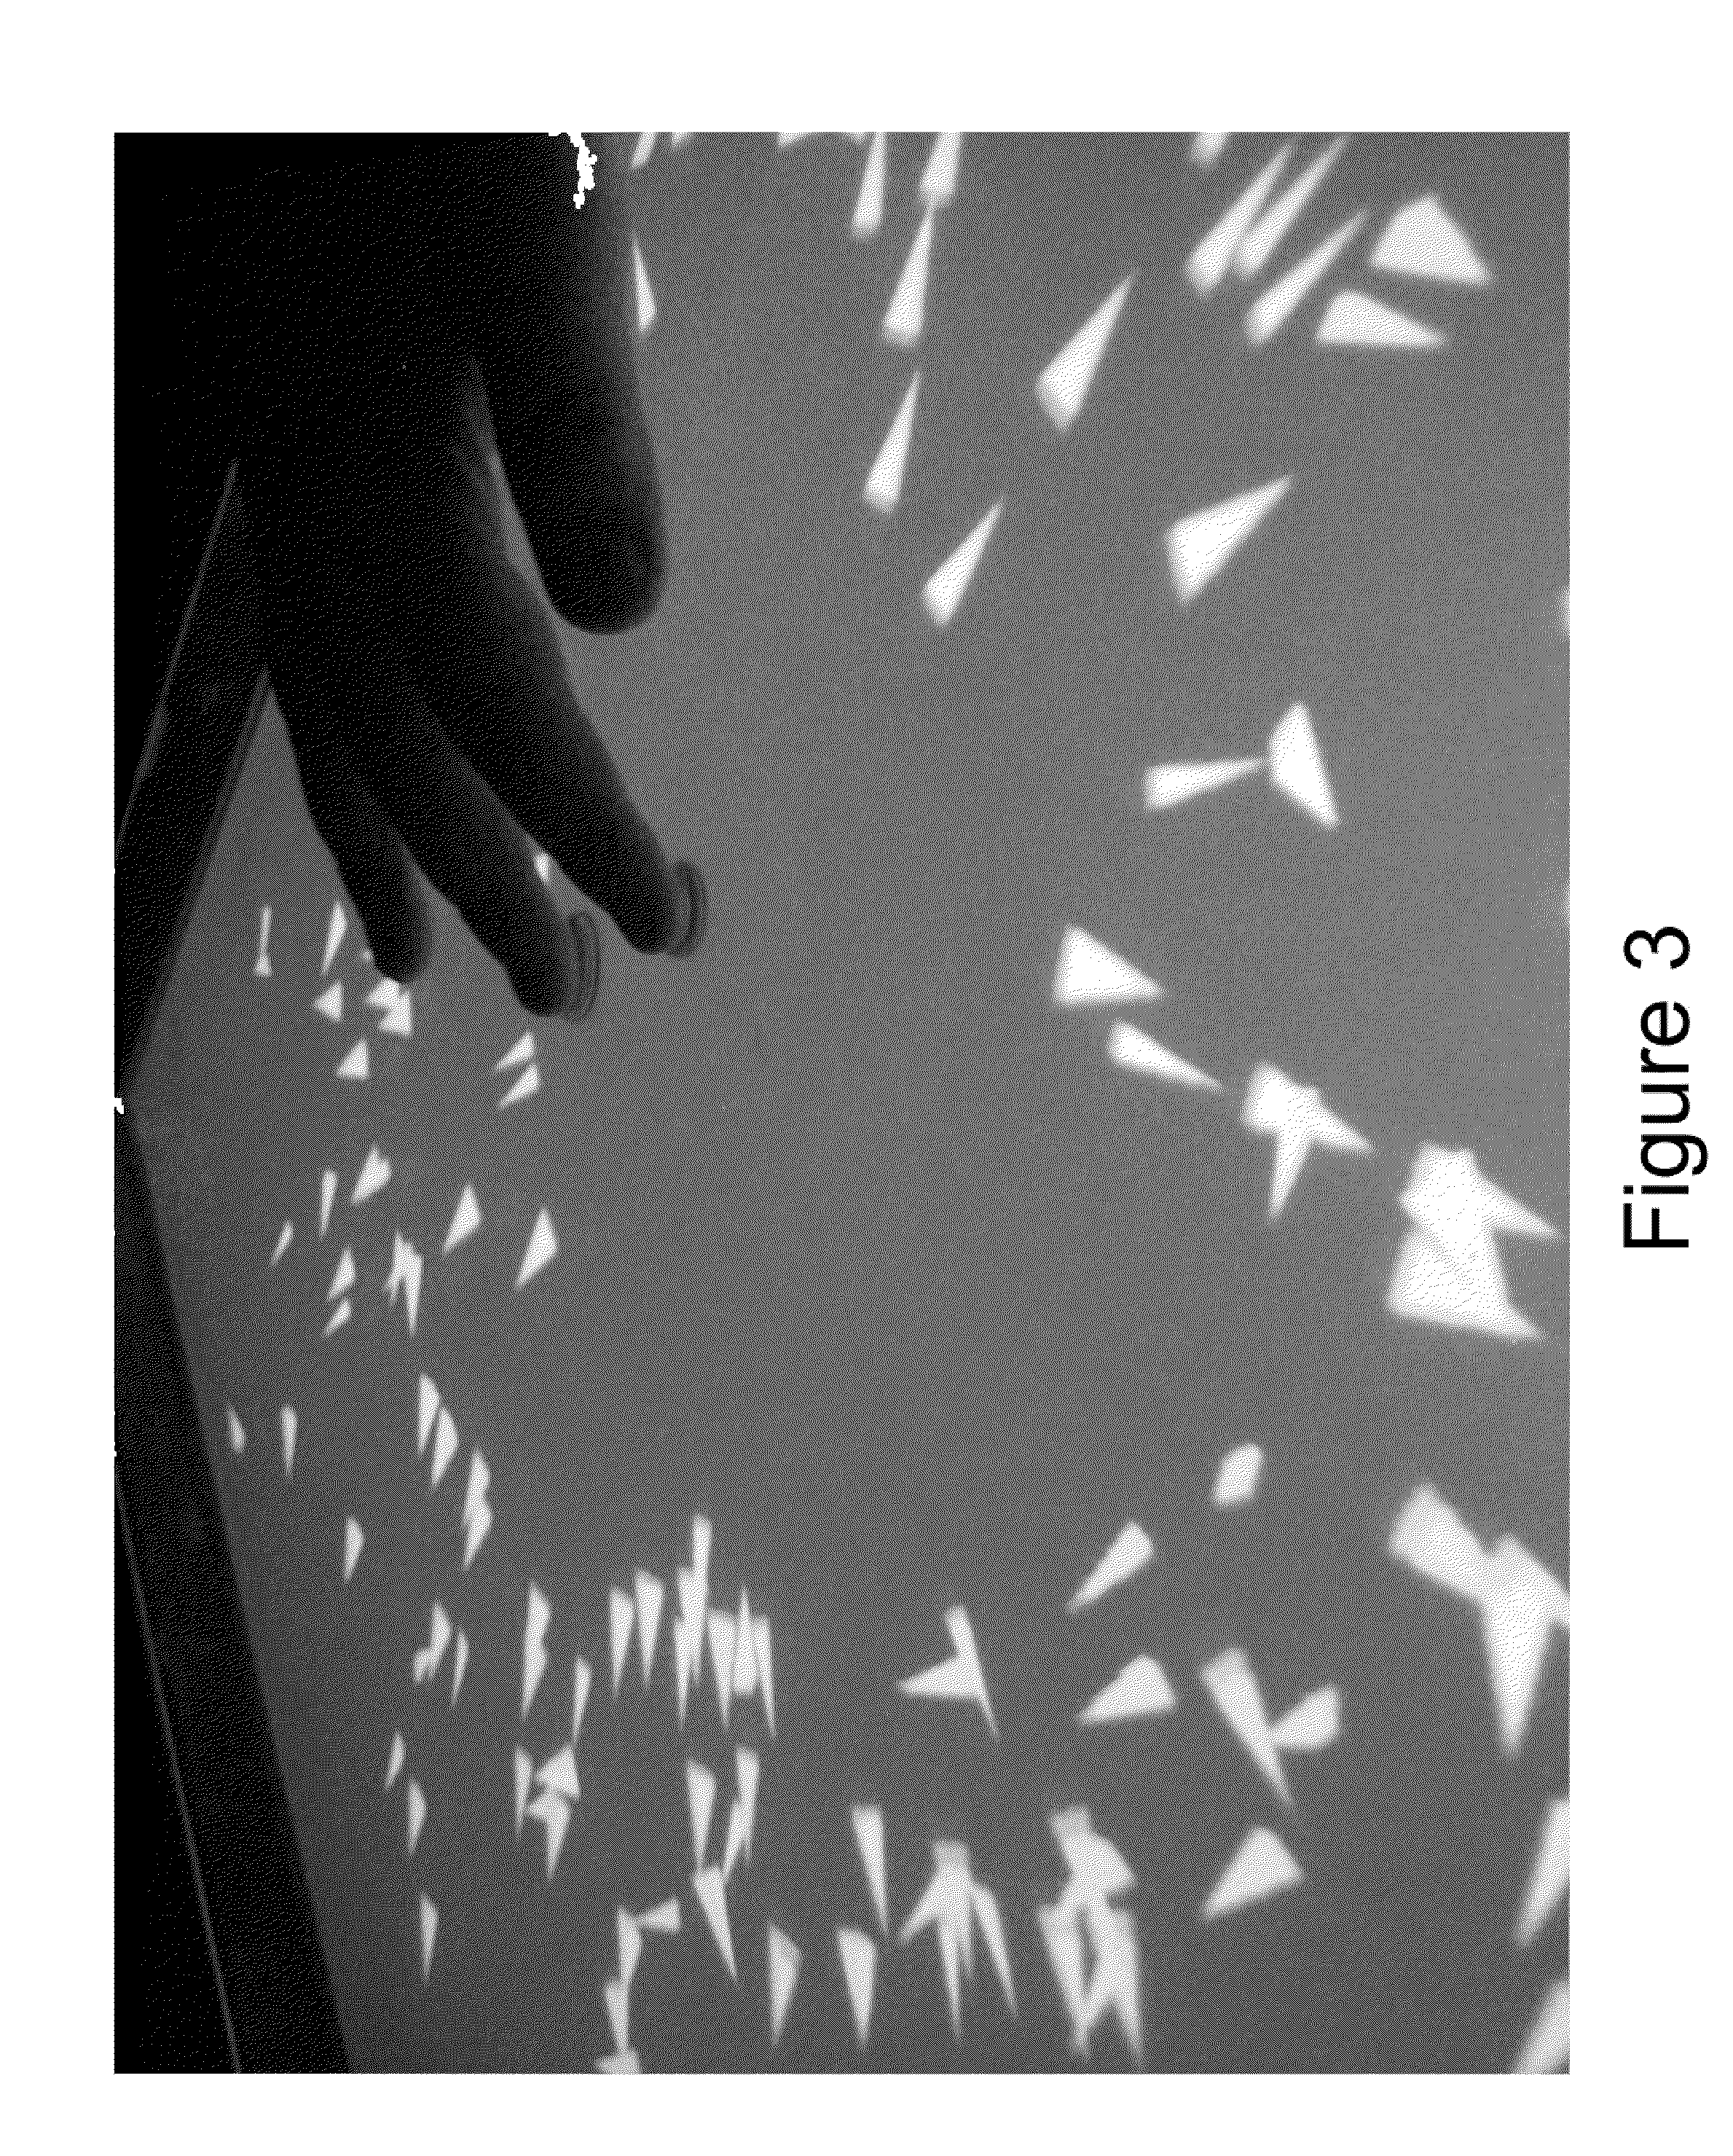 Liquid multi-touch sensor and display device